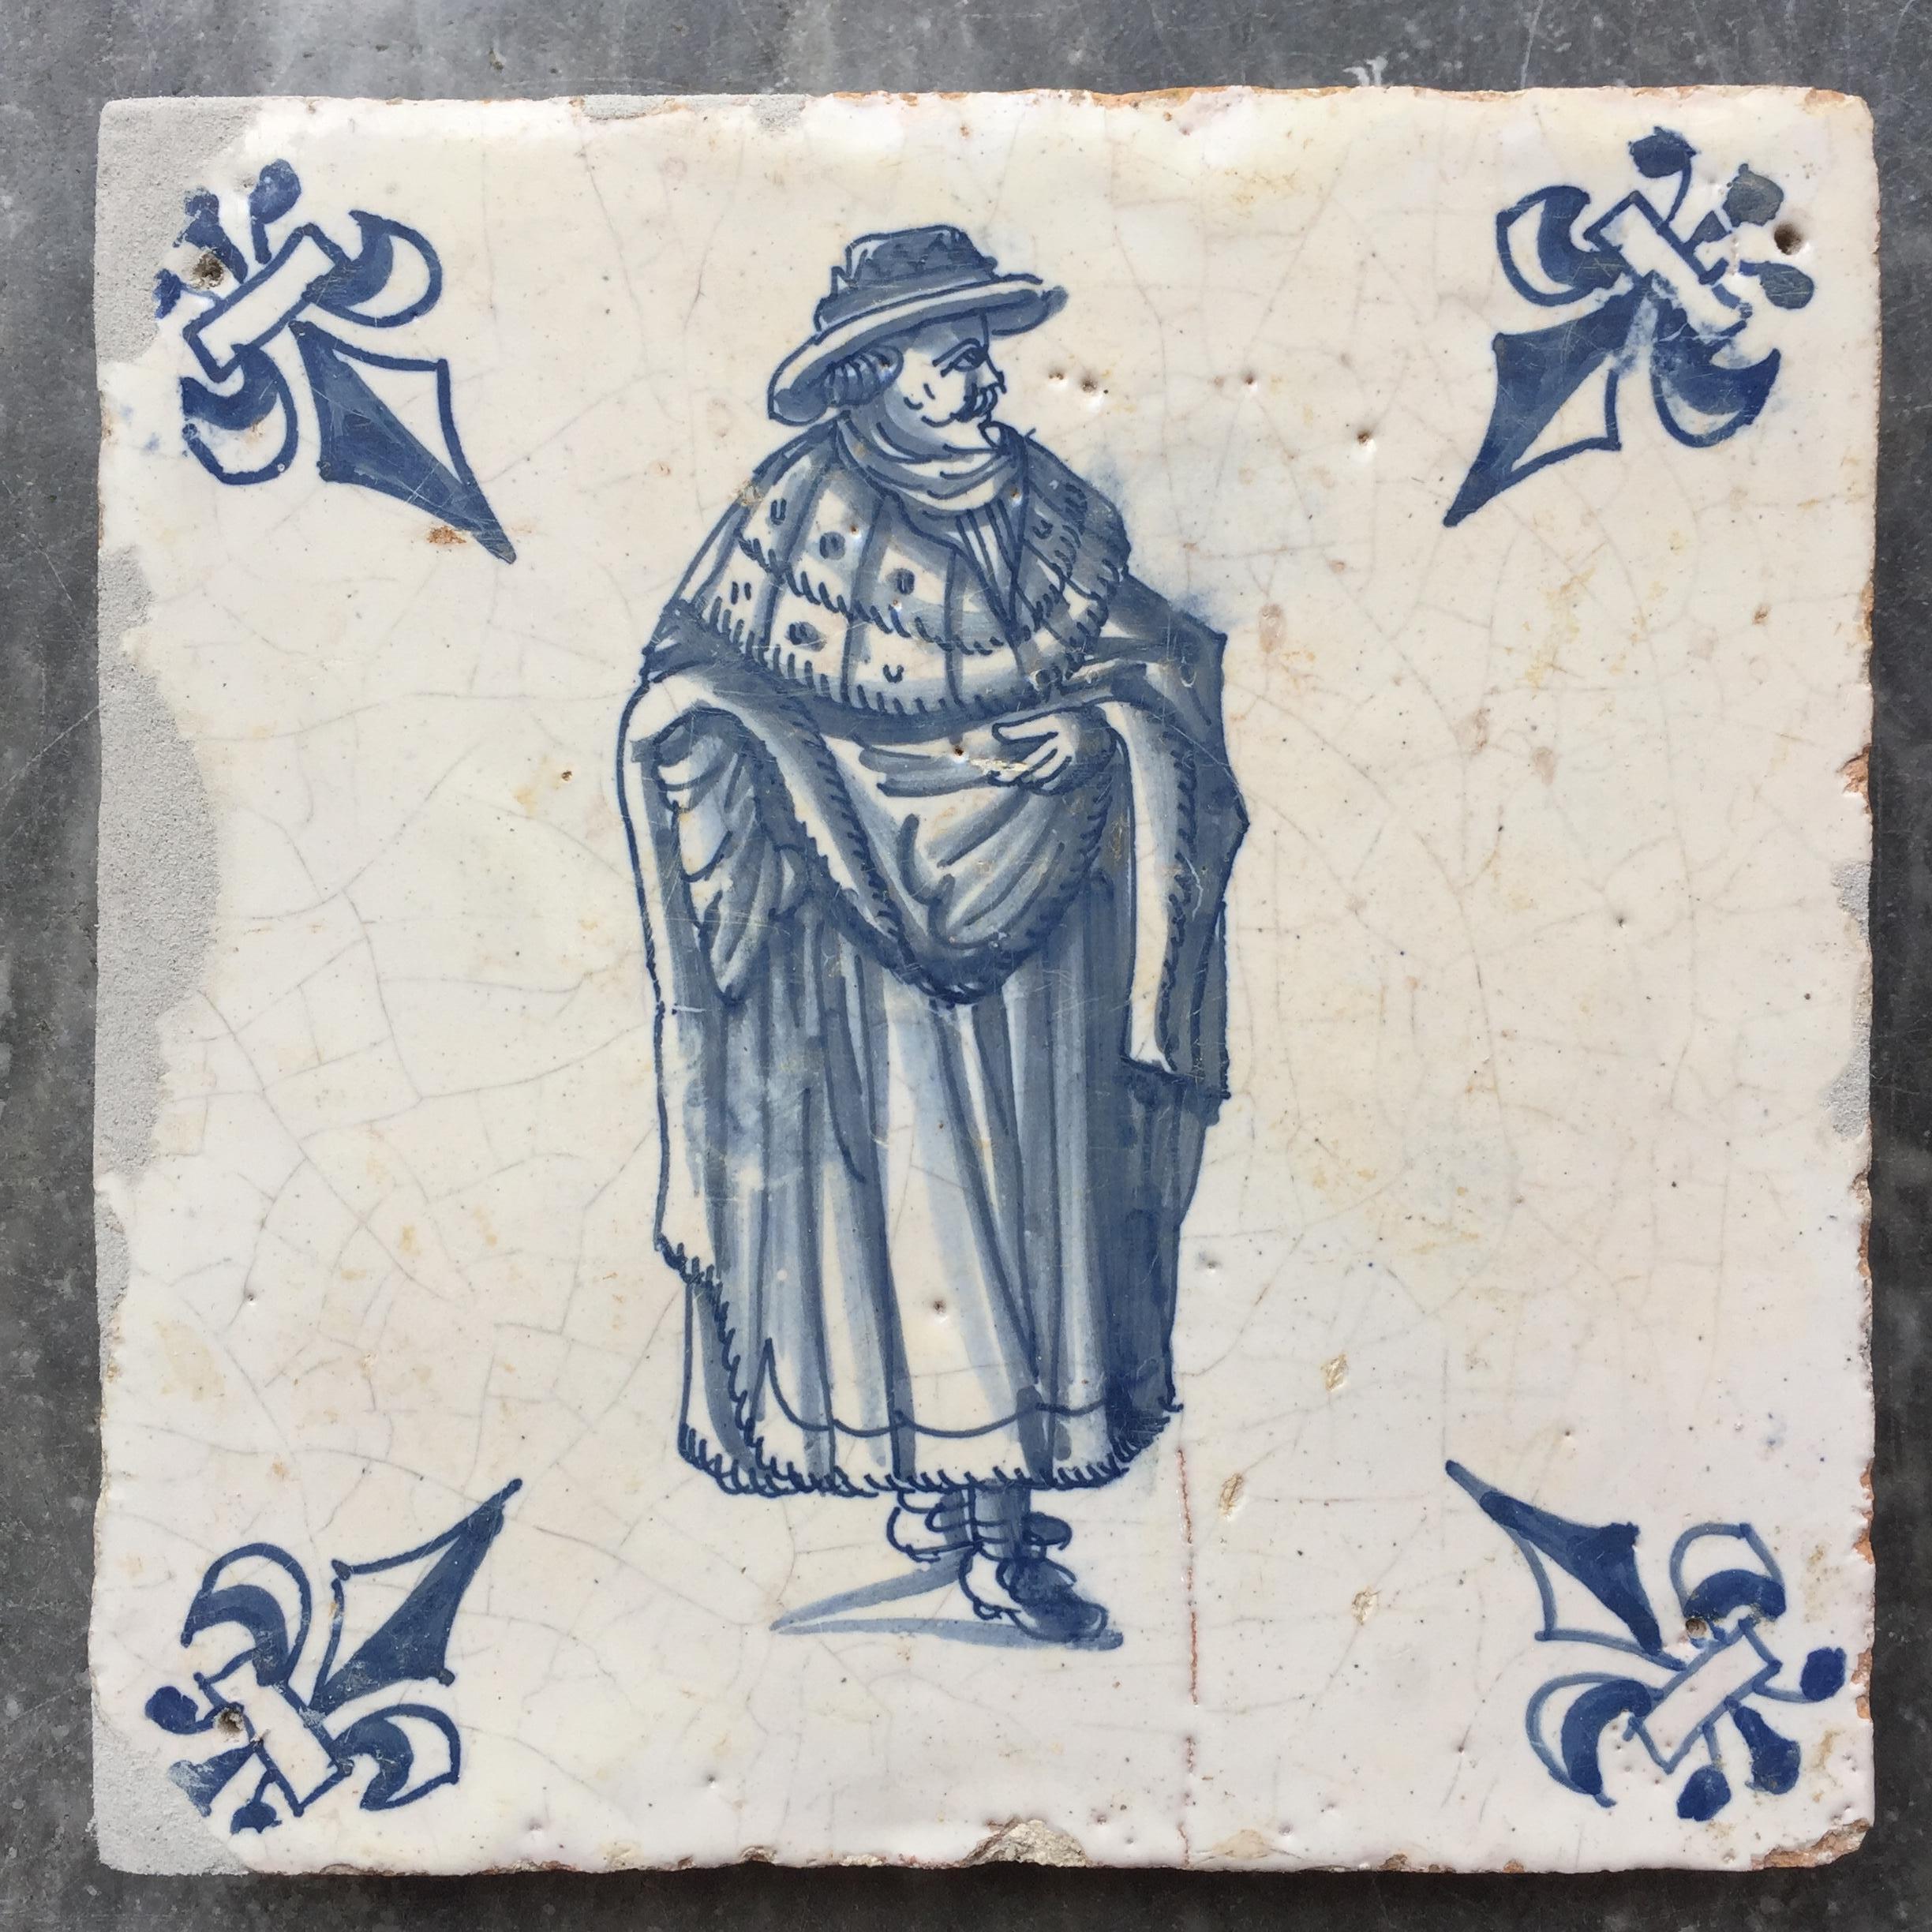 Exceptional Set of 20 Blue and White Dutch Delft Tiles with Figures 3